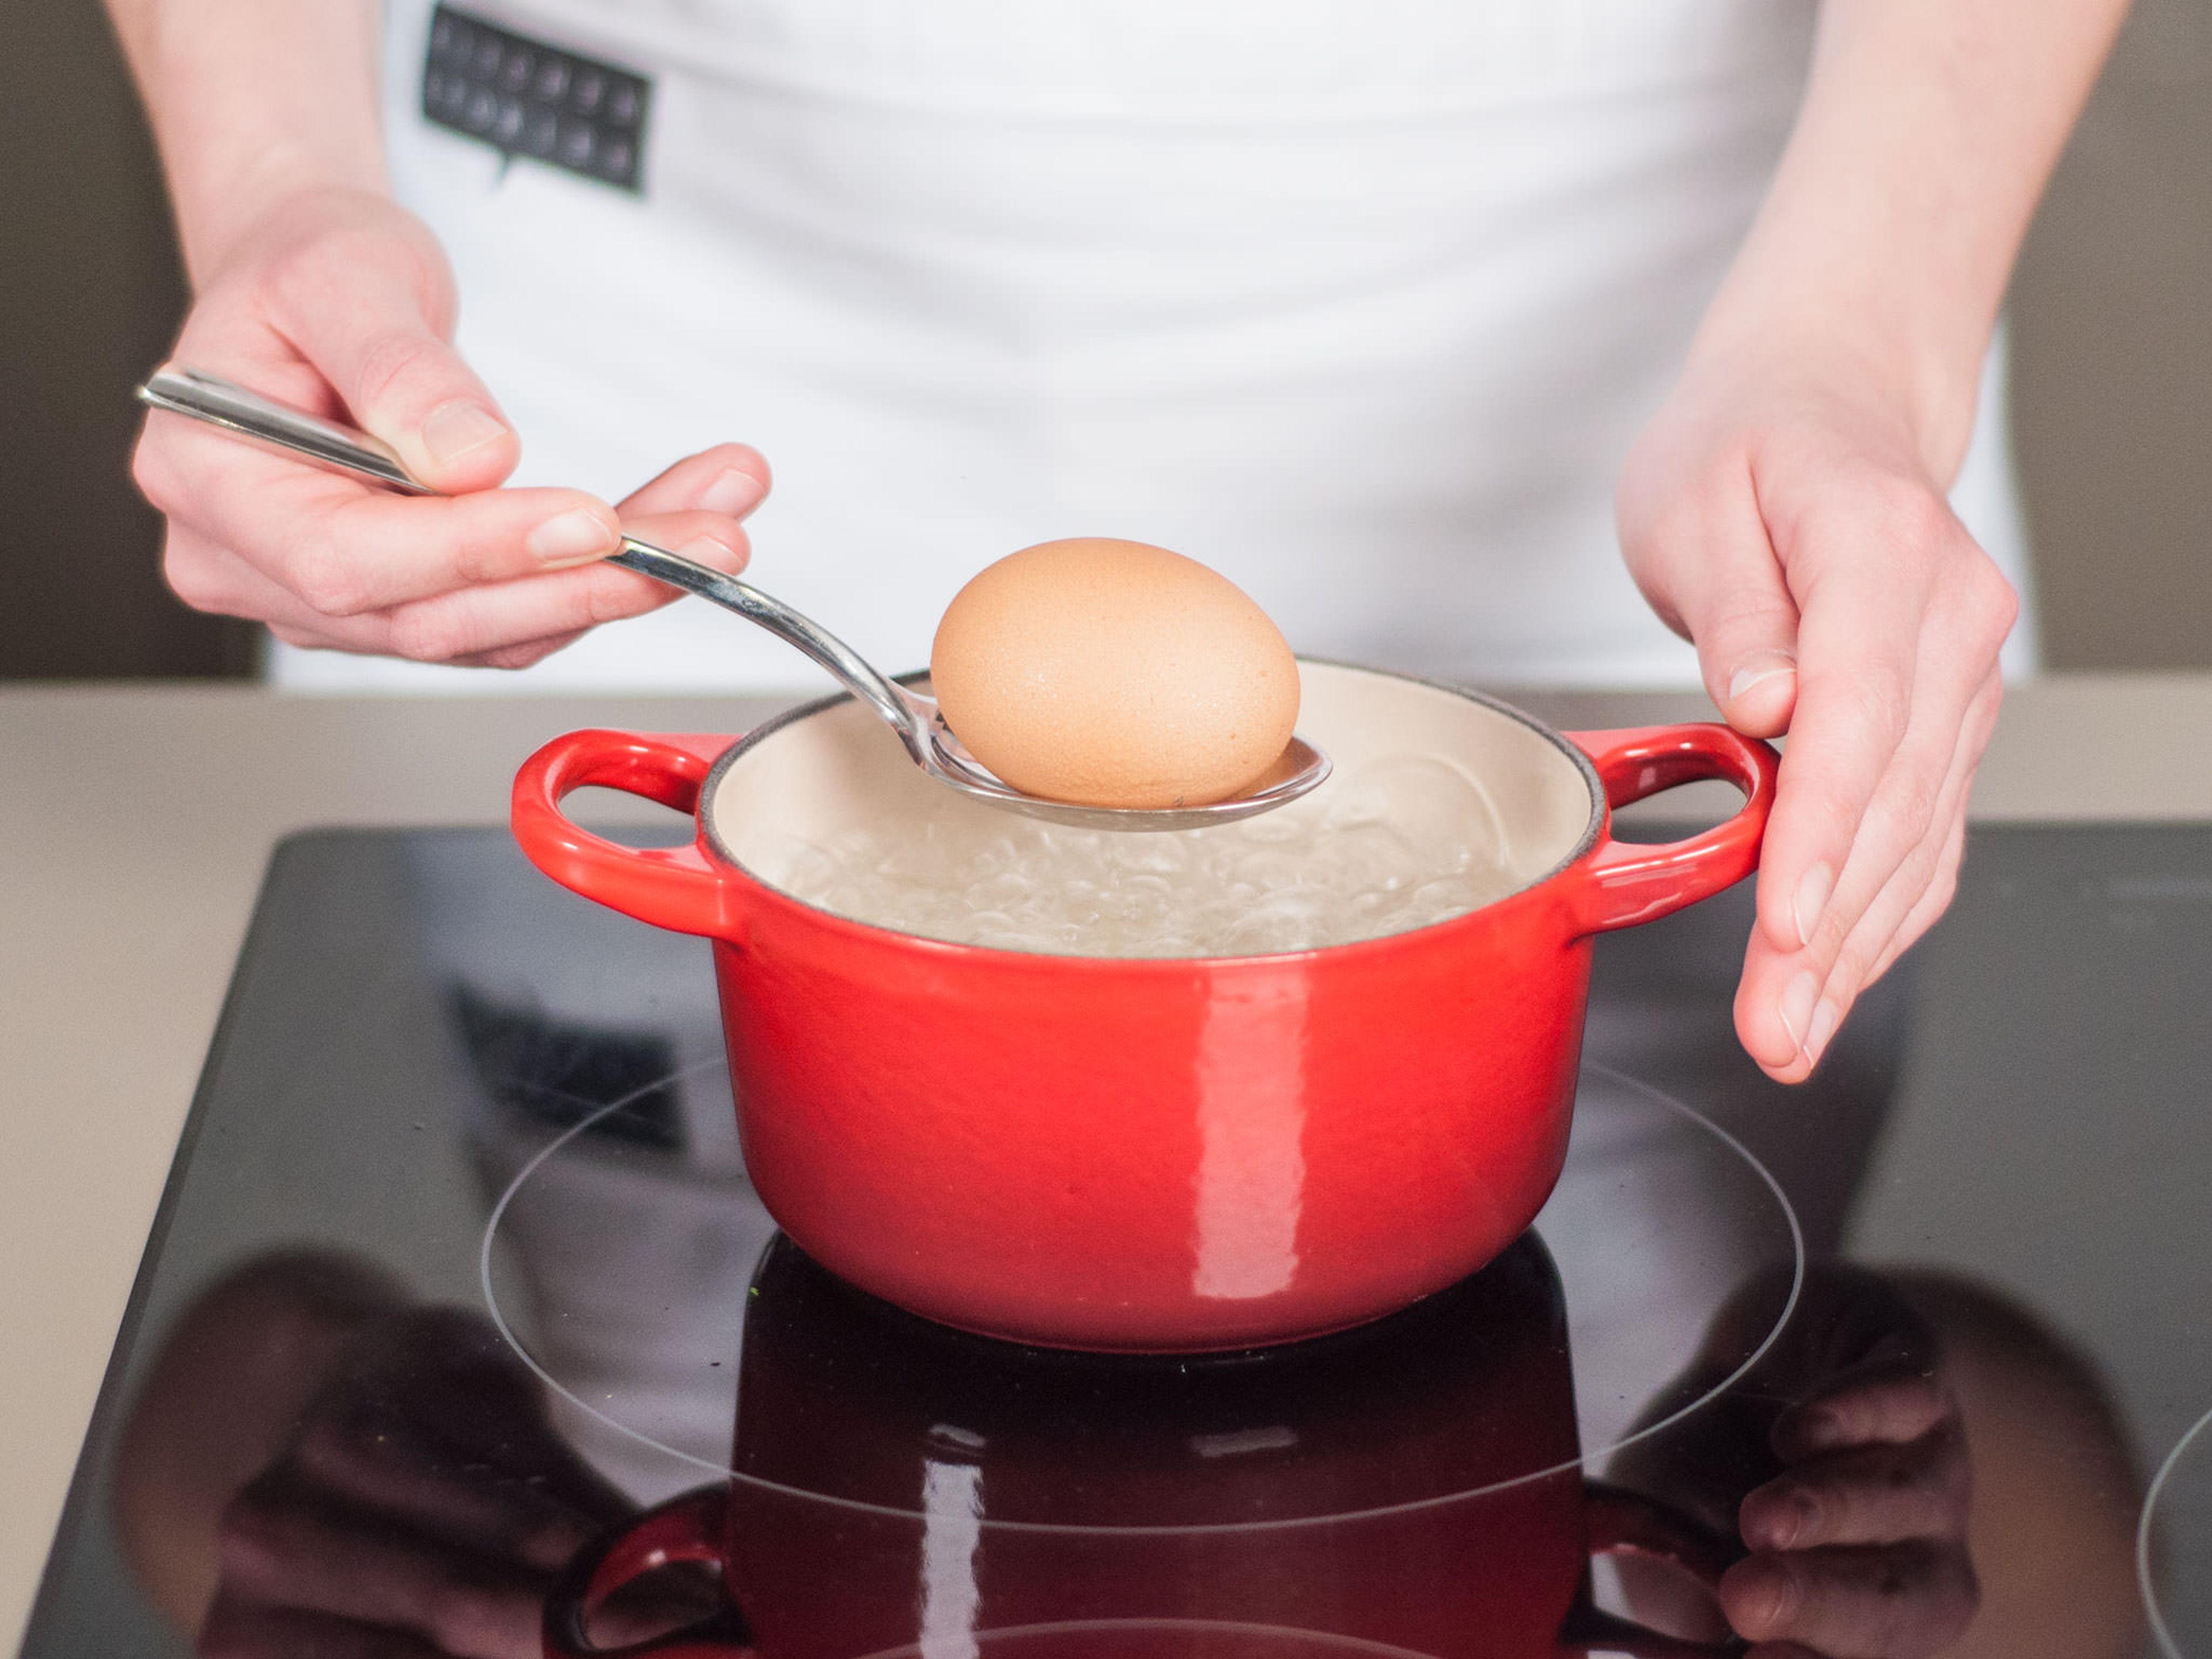 Add water to saucepan and bring to a boil. Cook egg in boiling water until hard boiled, approx. 8 – 10 min. Then remove from water, hold under cold water, peel, and dice. Set aside.